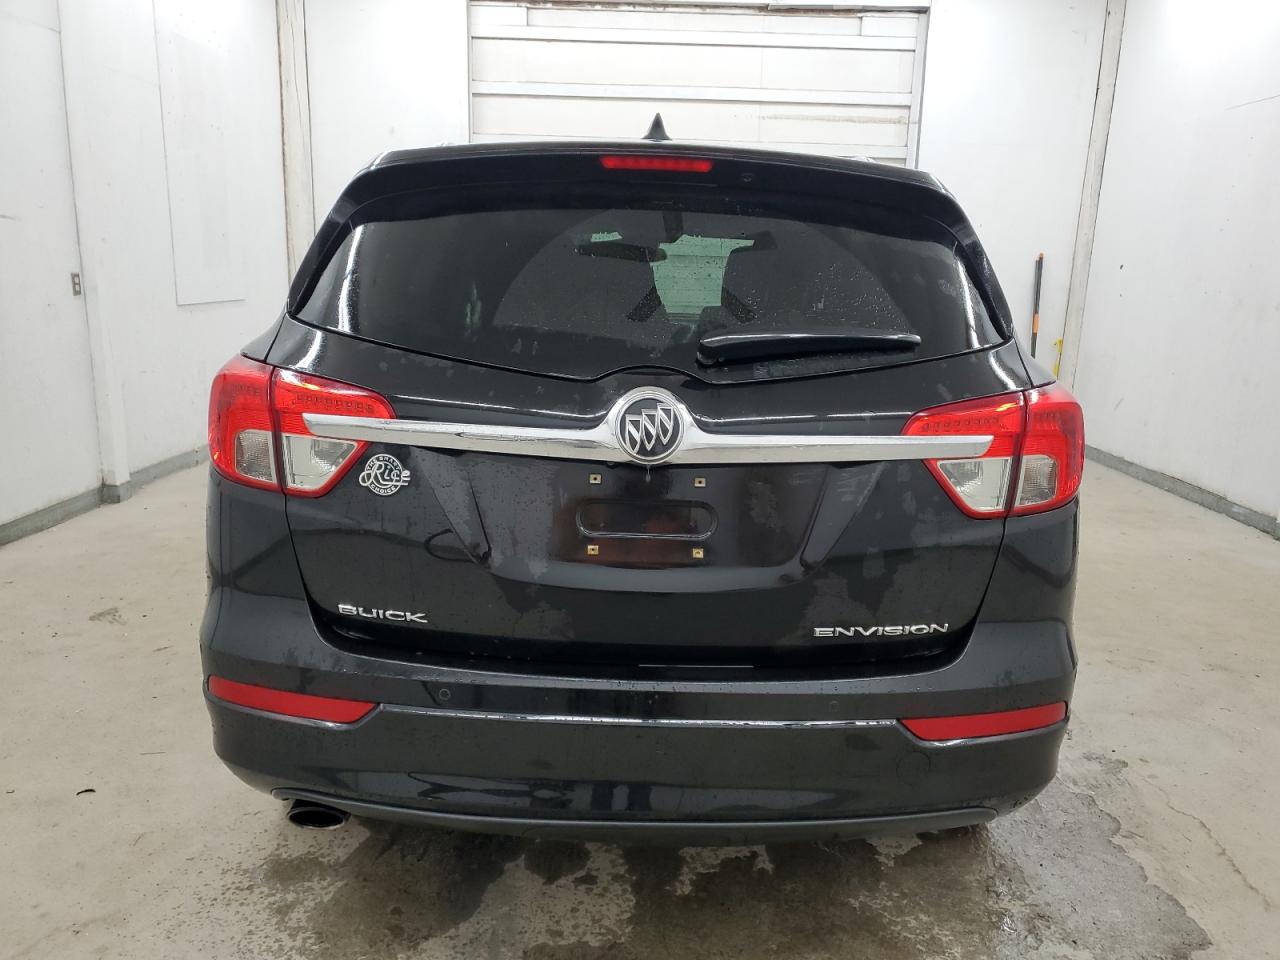 2017 Buick Envision Essence vin: LRBFXBSA9HD062426